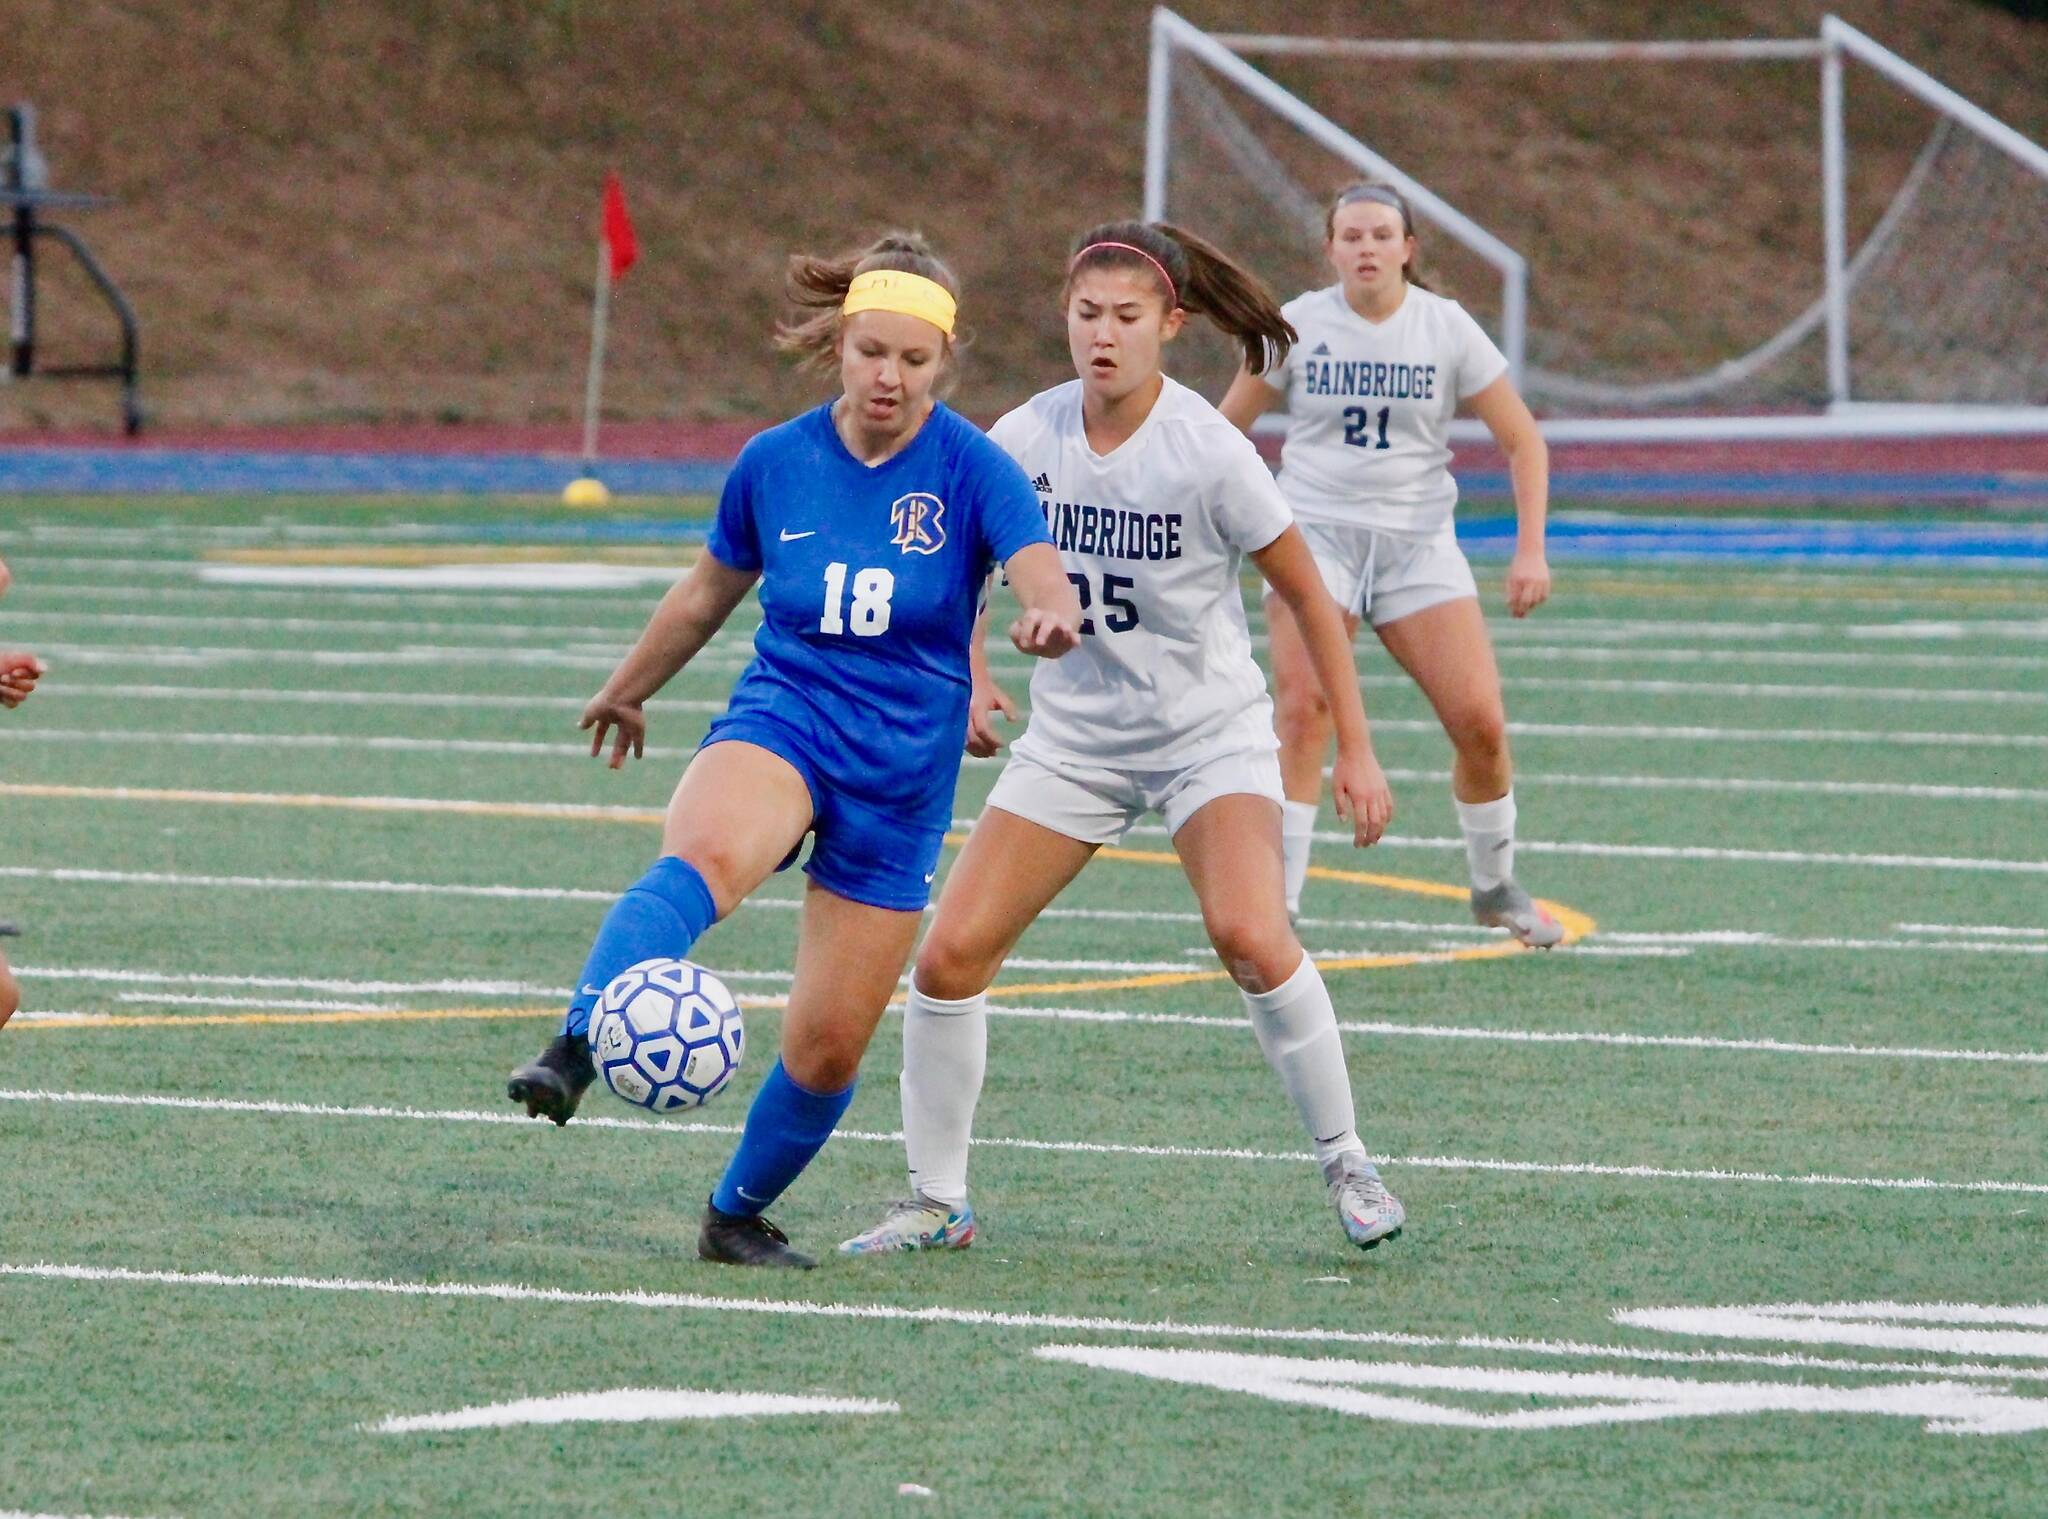 Hailey Fink looks for a way to get the ball from Bremerton’s Alexis Hooley.